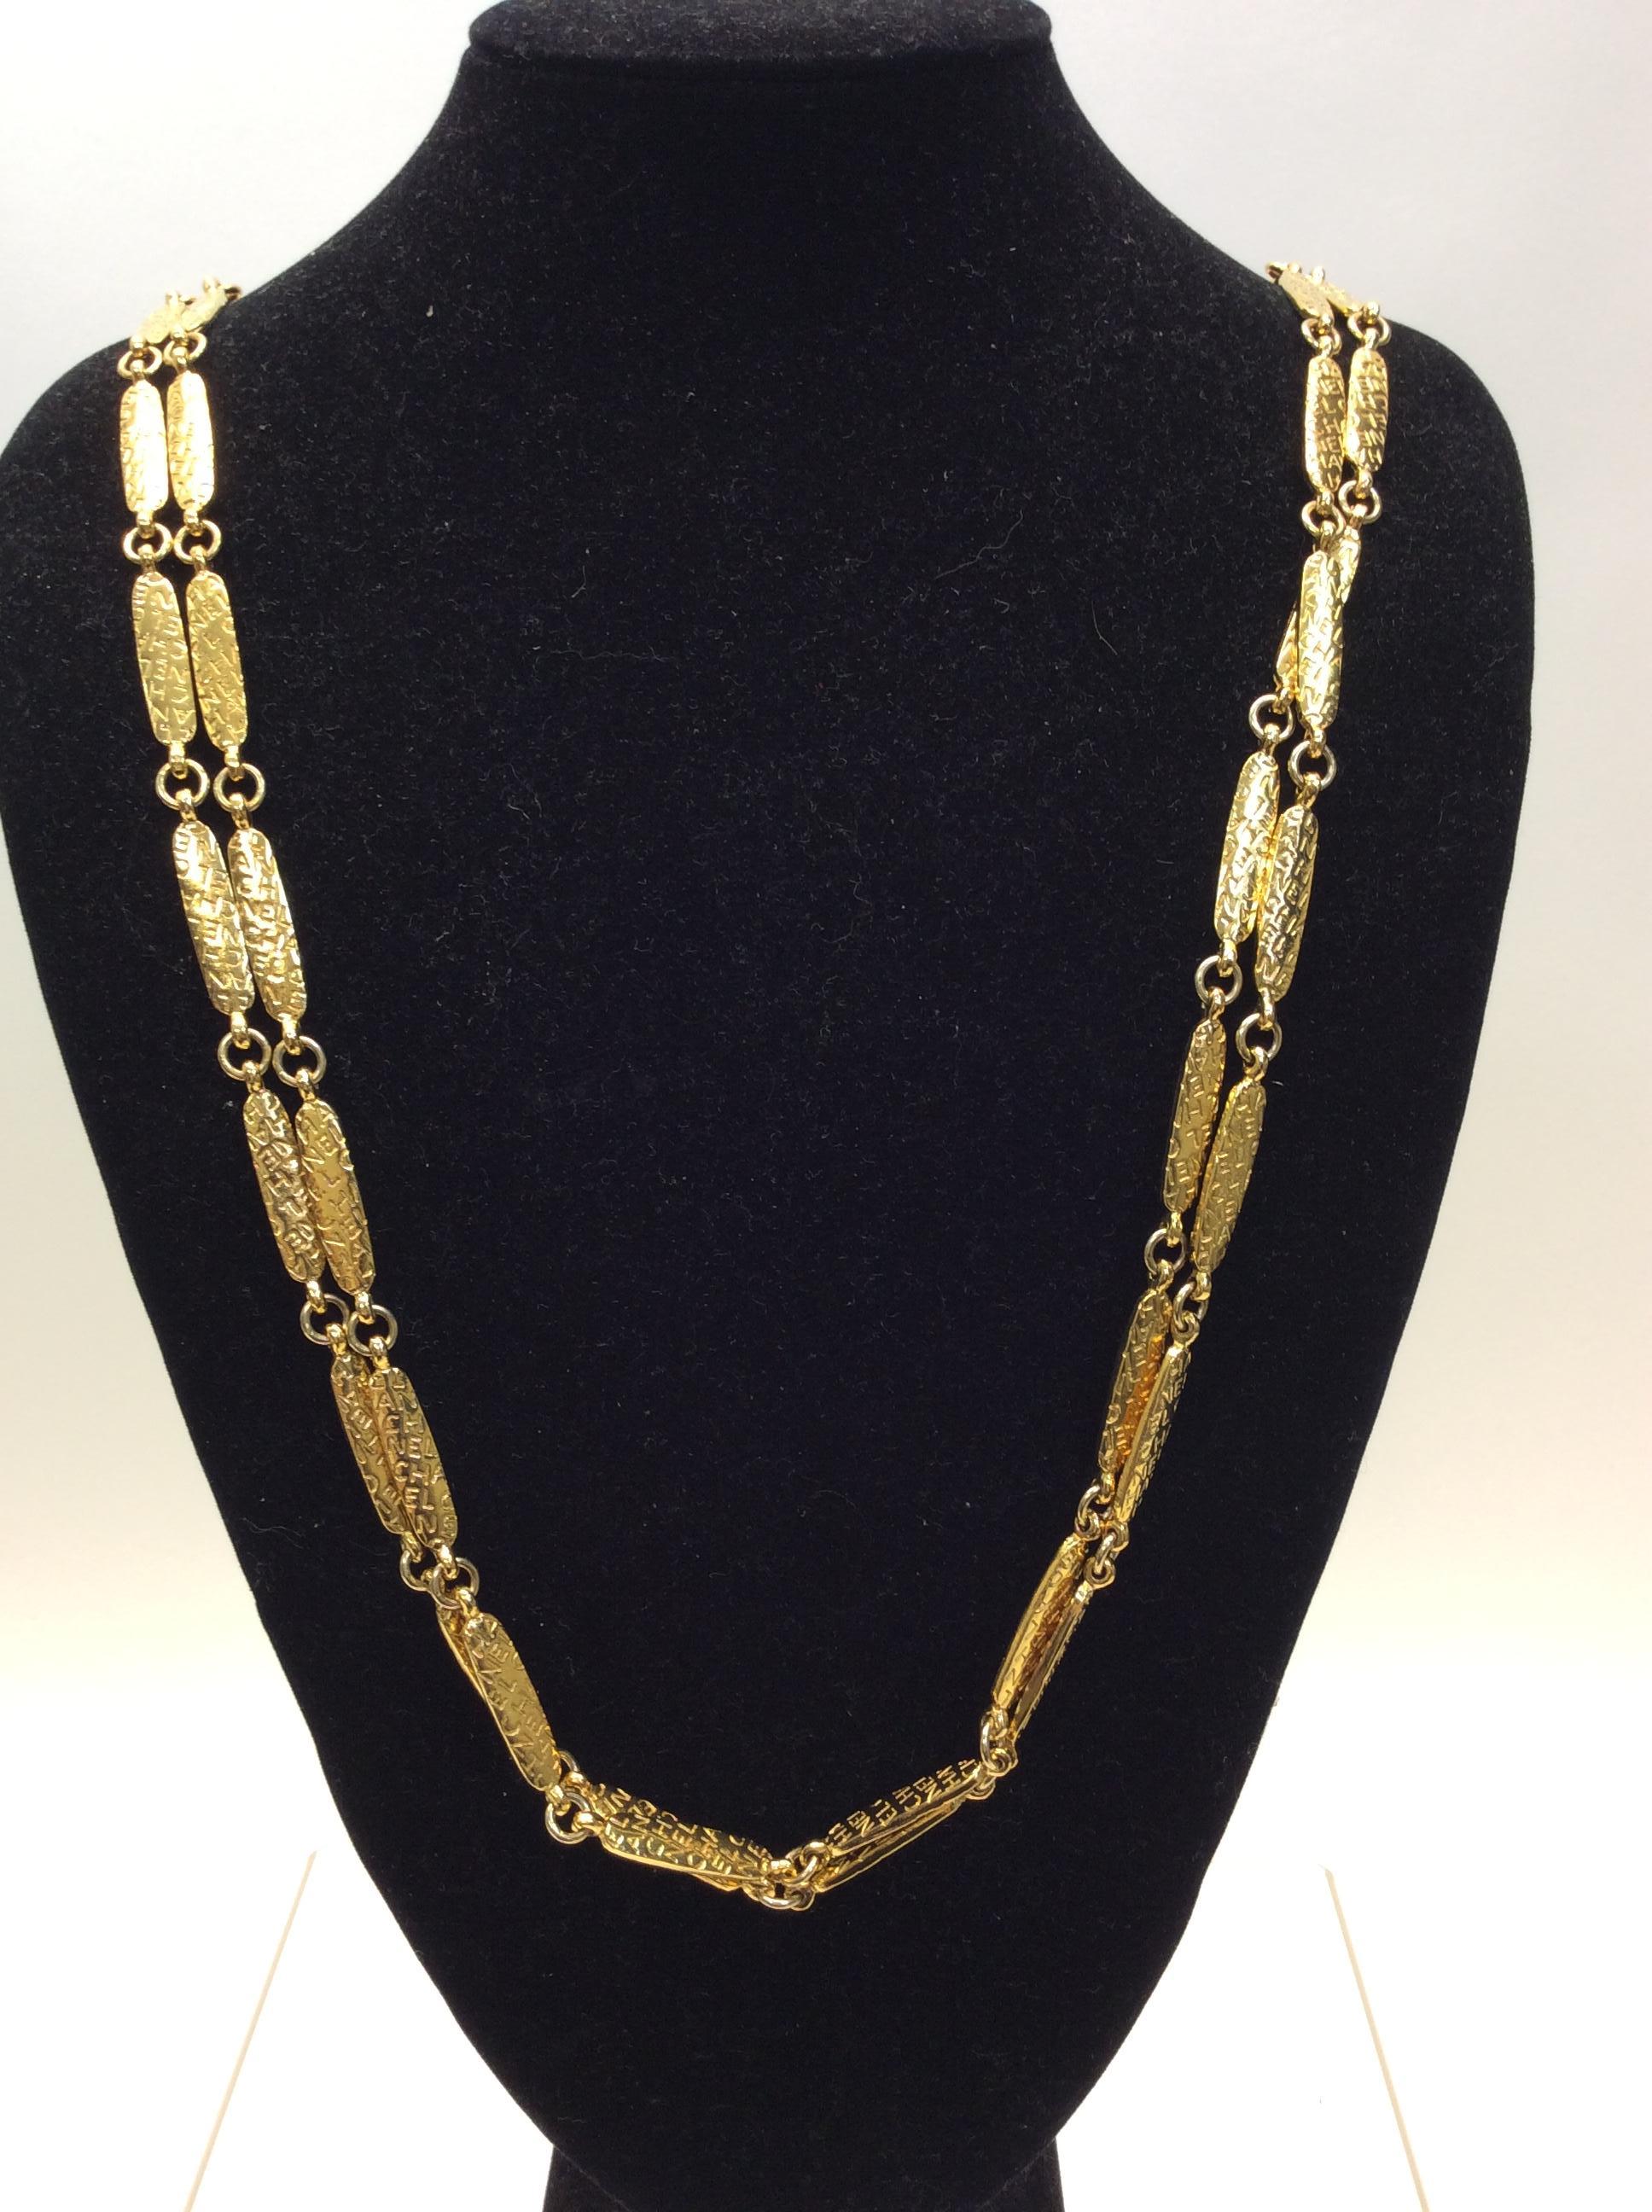 Chanel Gold Long Necklace In Good Condition For Sale In Narberth, PA